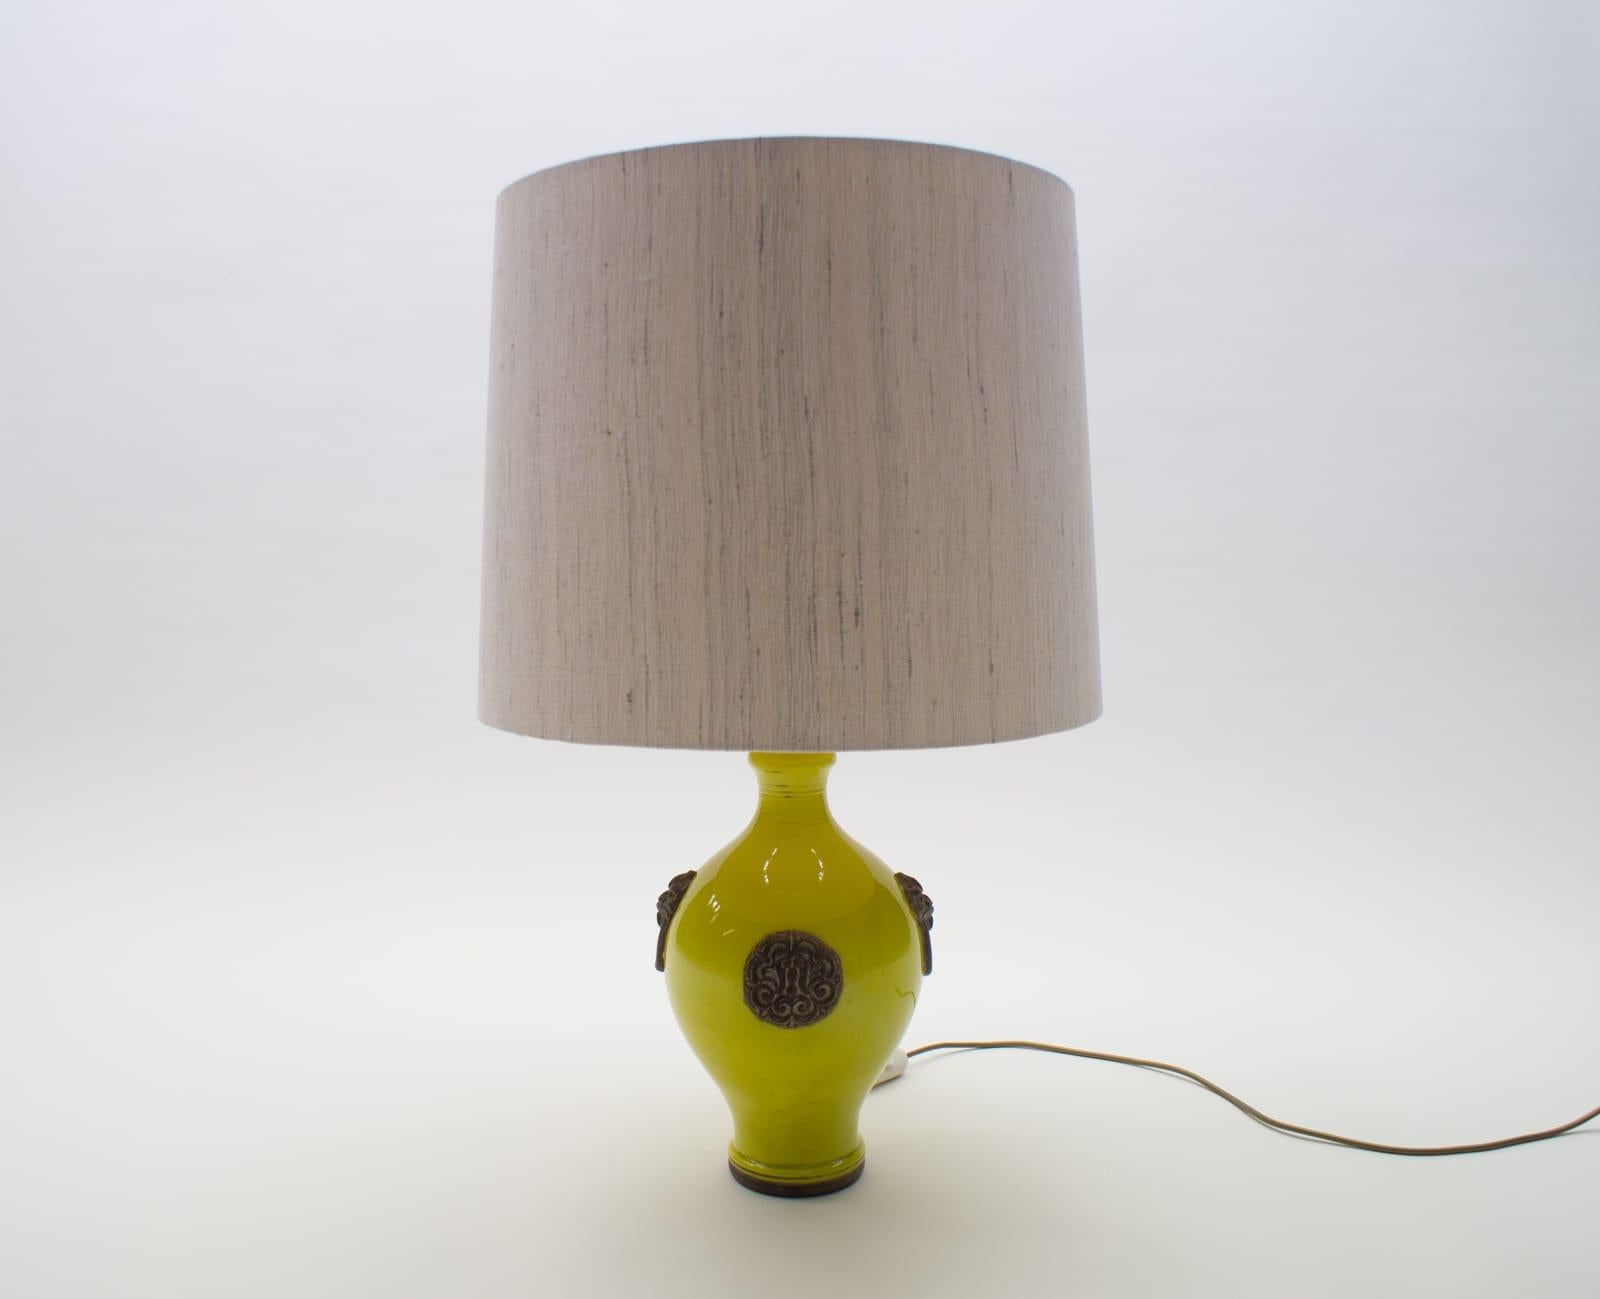 Mid-Century Modern Oatmeal and Yellow Gilt Glazed Ceramic Table Lamp by Ugo Zaccagnini, Italy 1960s en vente